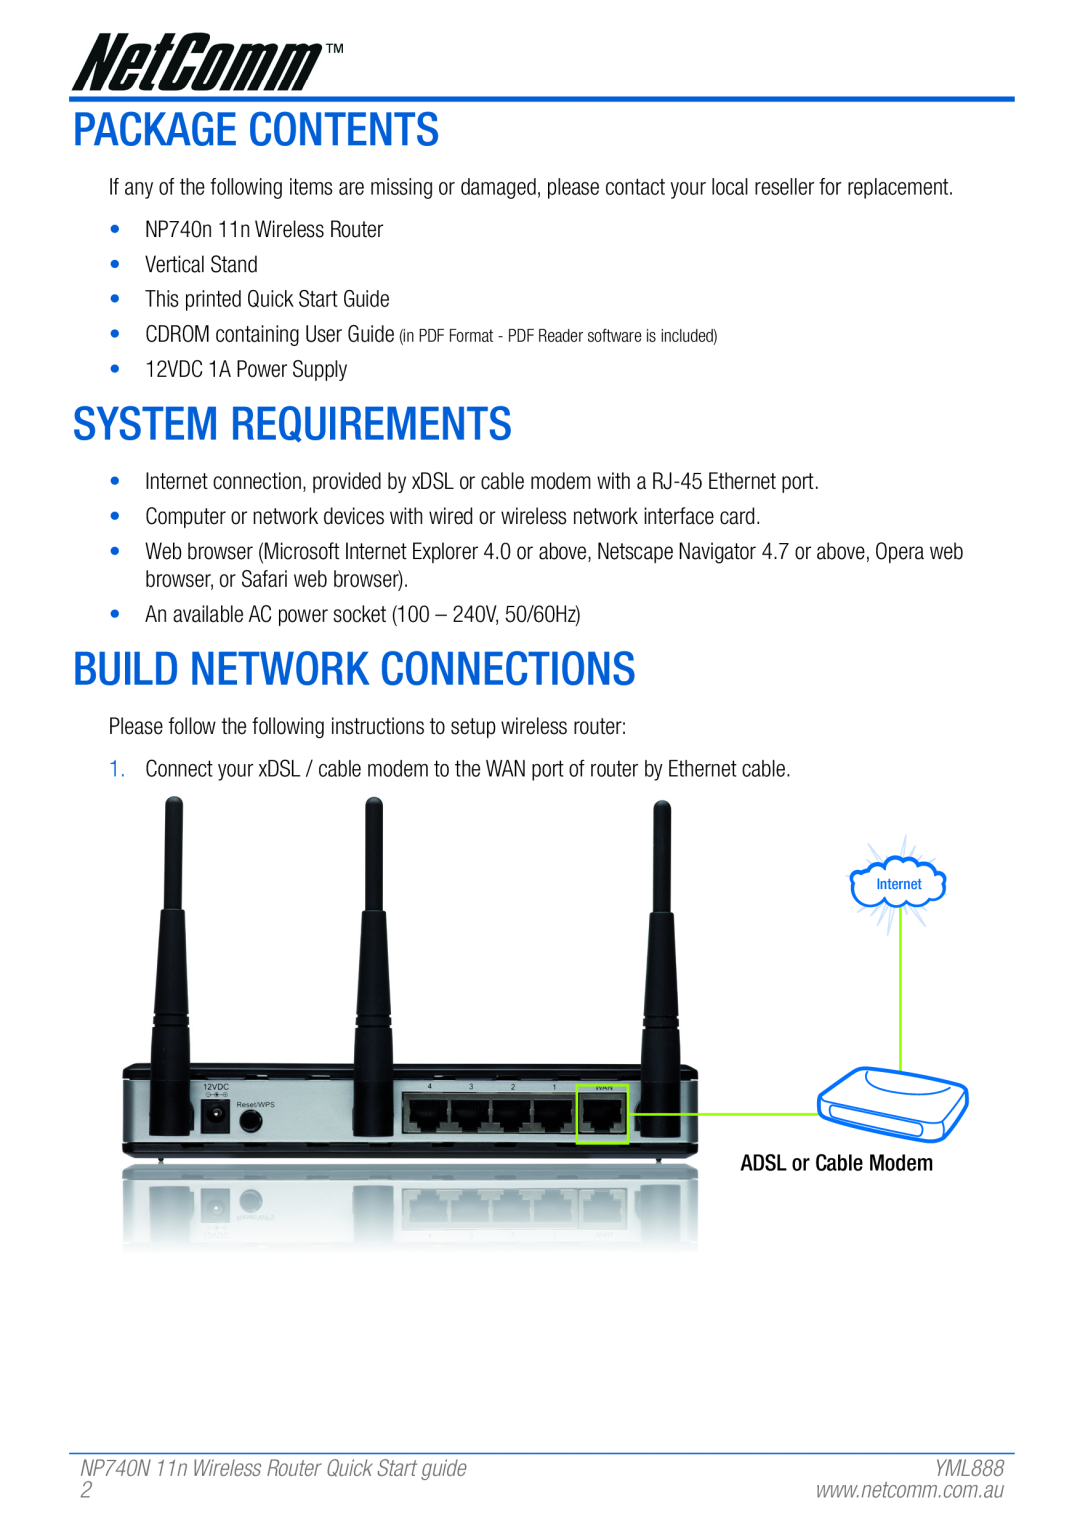 NetComm NP740N quick start Package Contents, System Requirements, Build Network Connections 